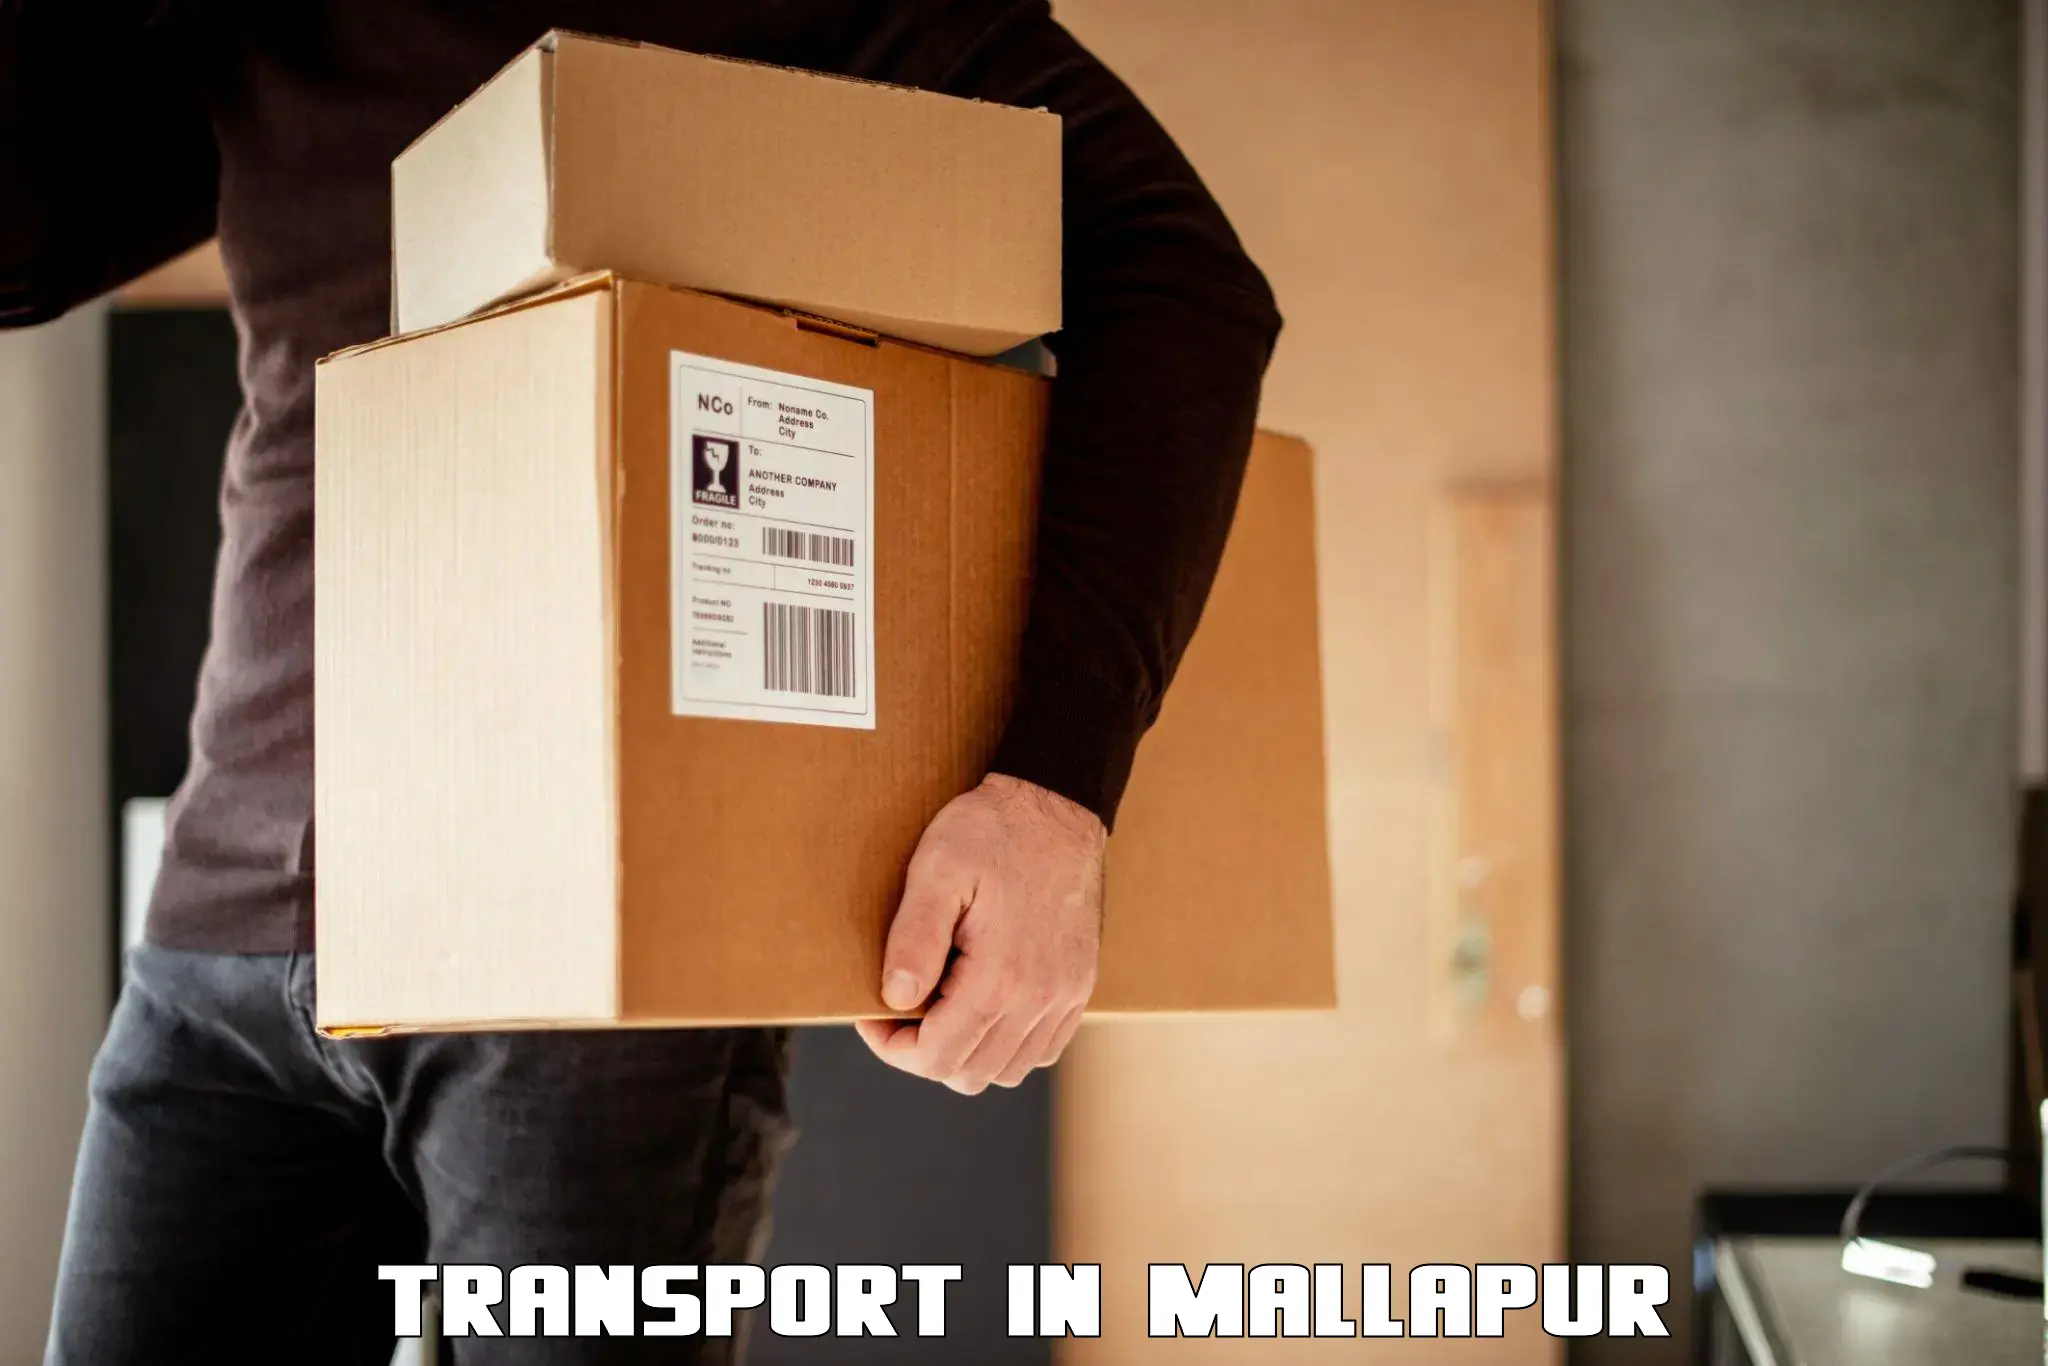 Container transportation services in Mallapur